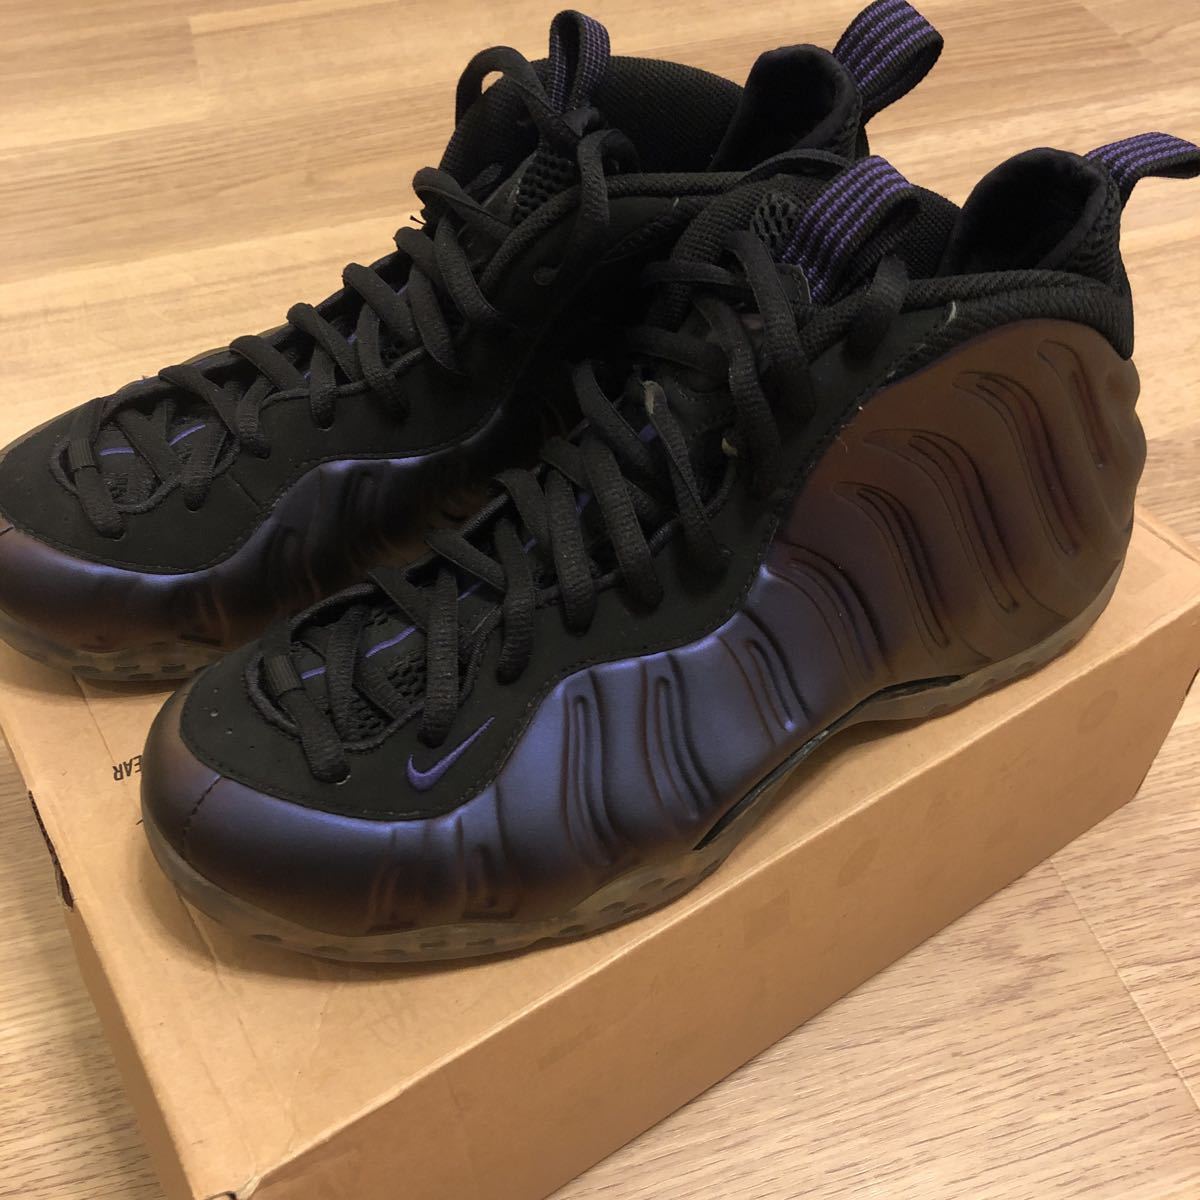 NIKE AIR FOAMPOSITE ONE EGGPLANT エア フォームポジット ワン エッグプラント US10.5 正規 品　未使用 314996-051